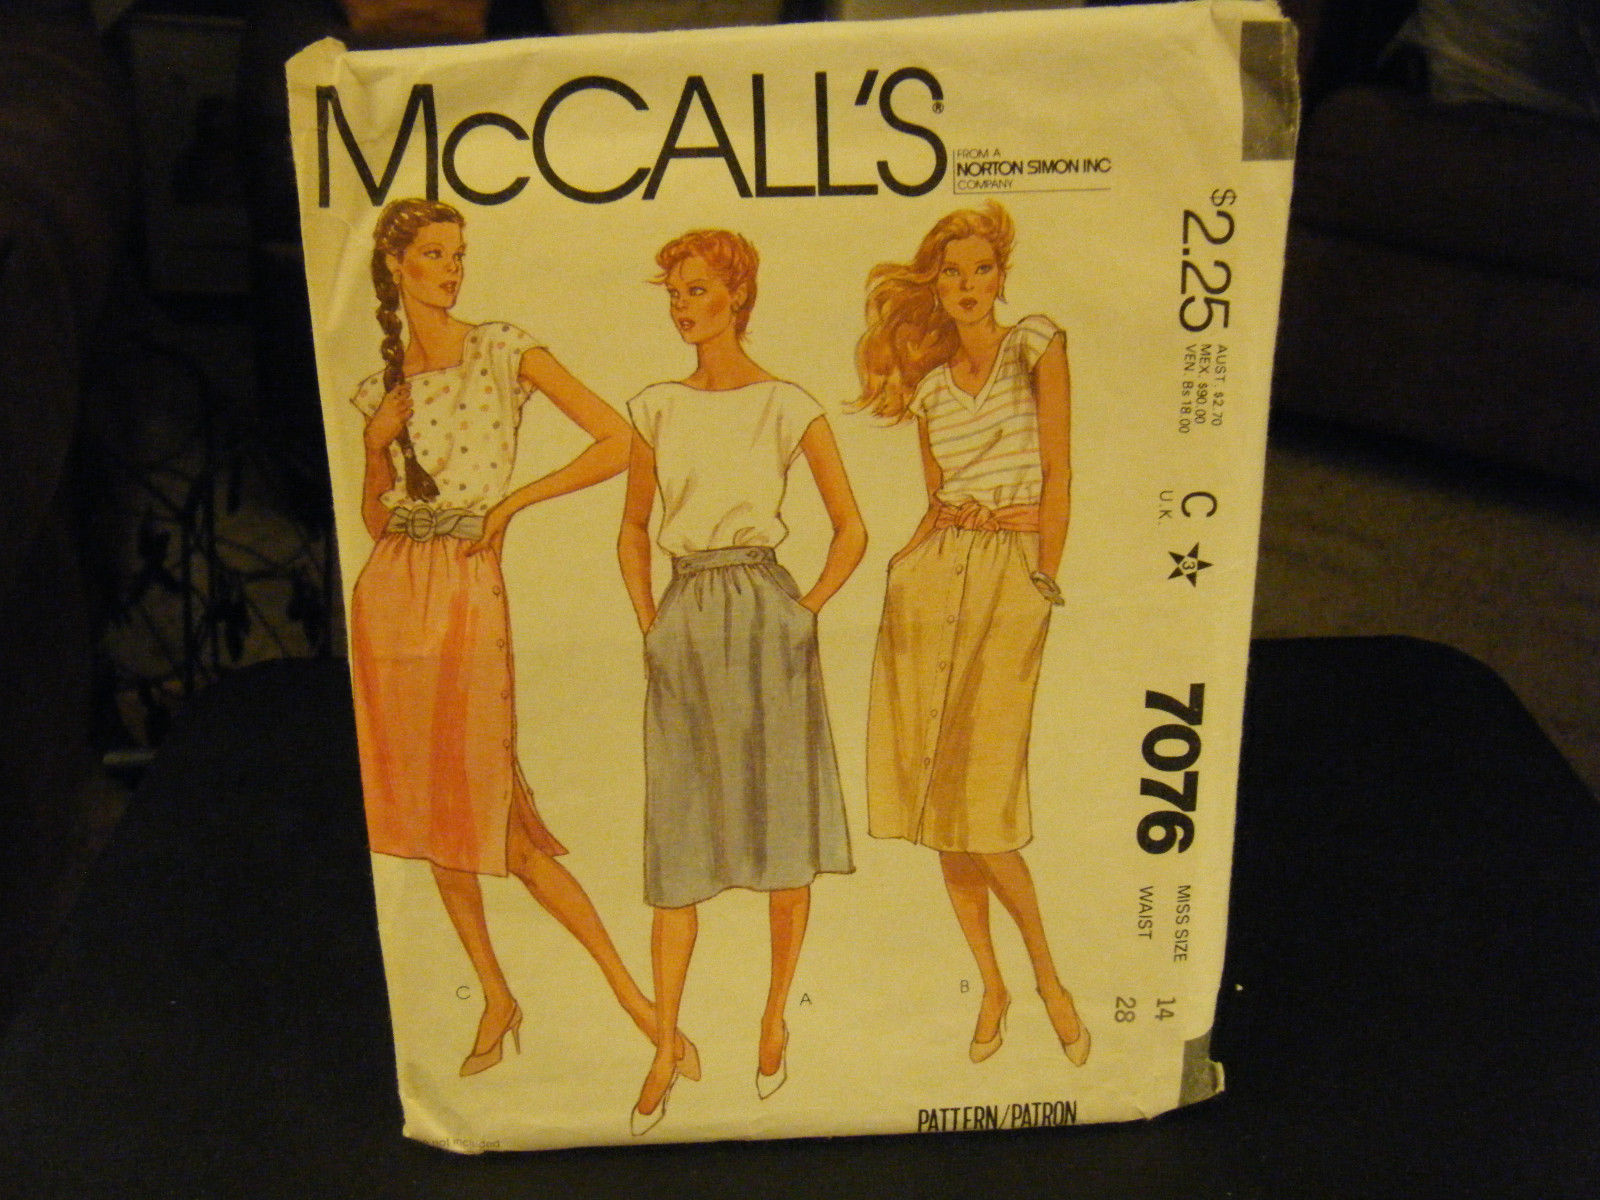 Primary image for McCall's 7076 Misses Skirts Pattern - Size 14 Waist 28